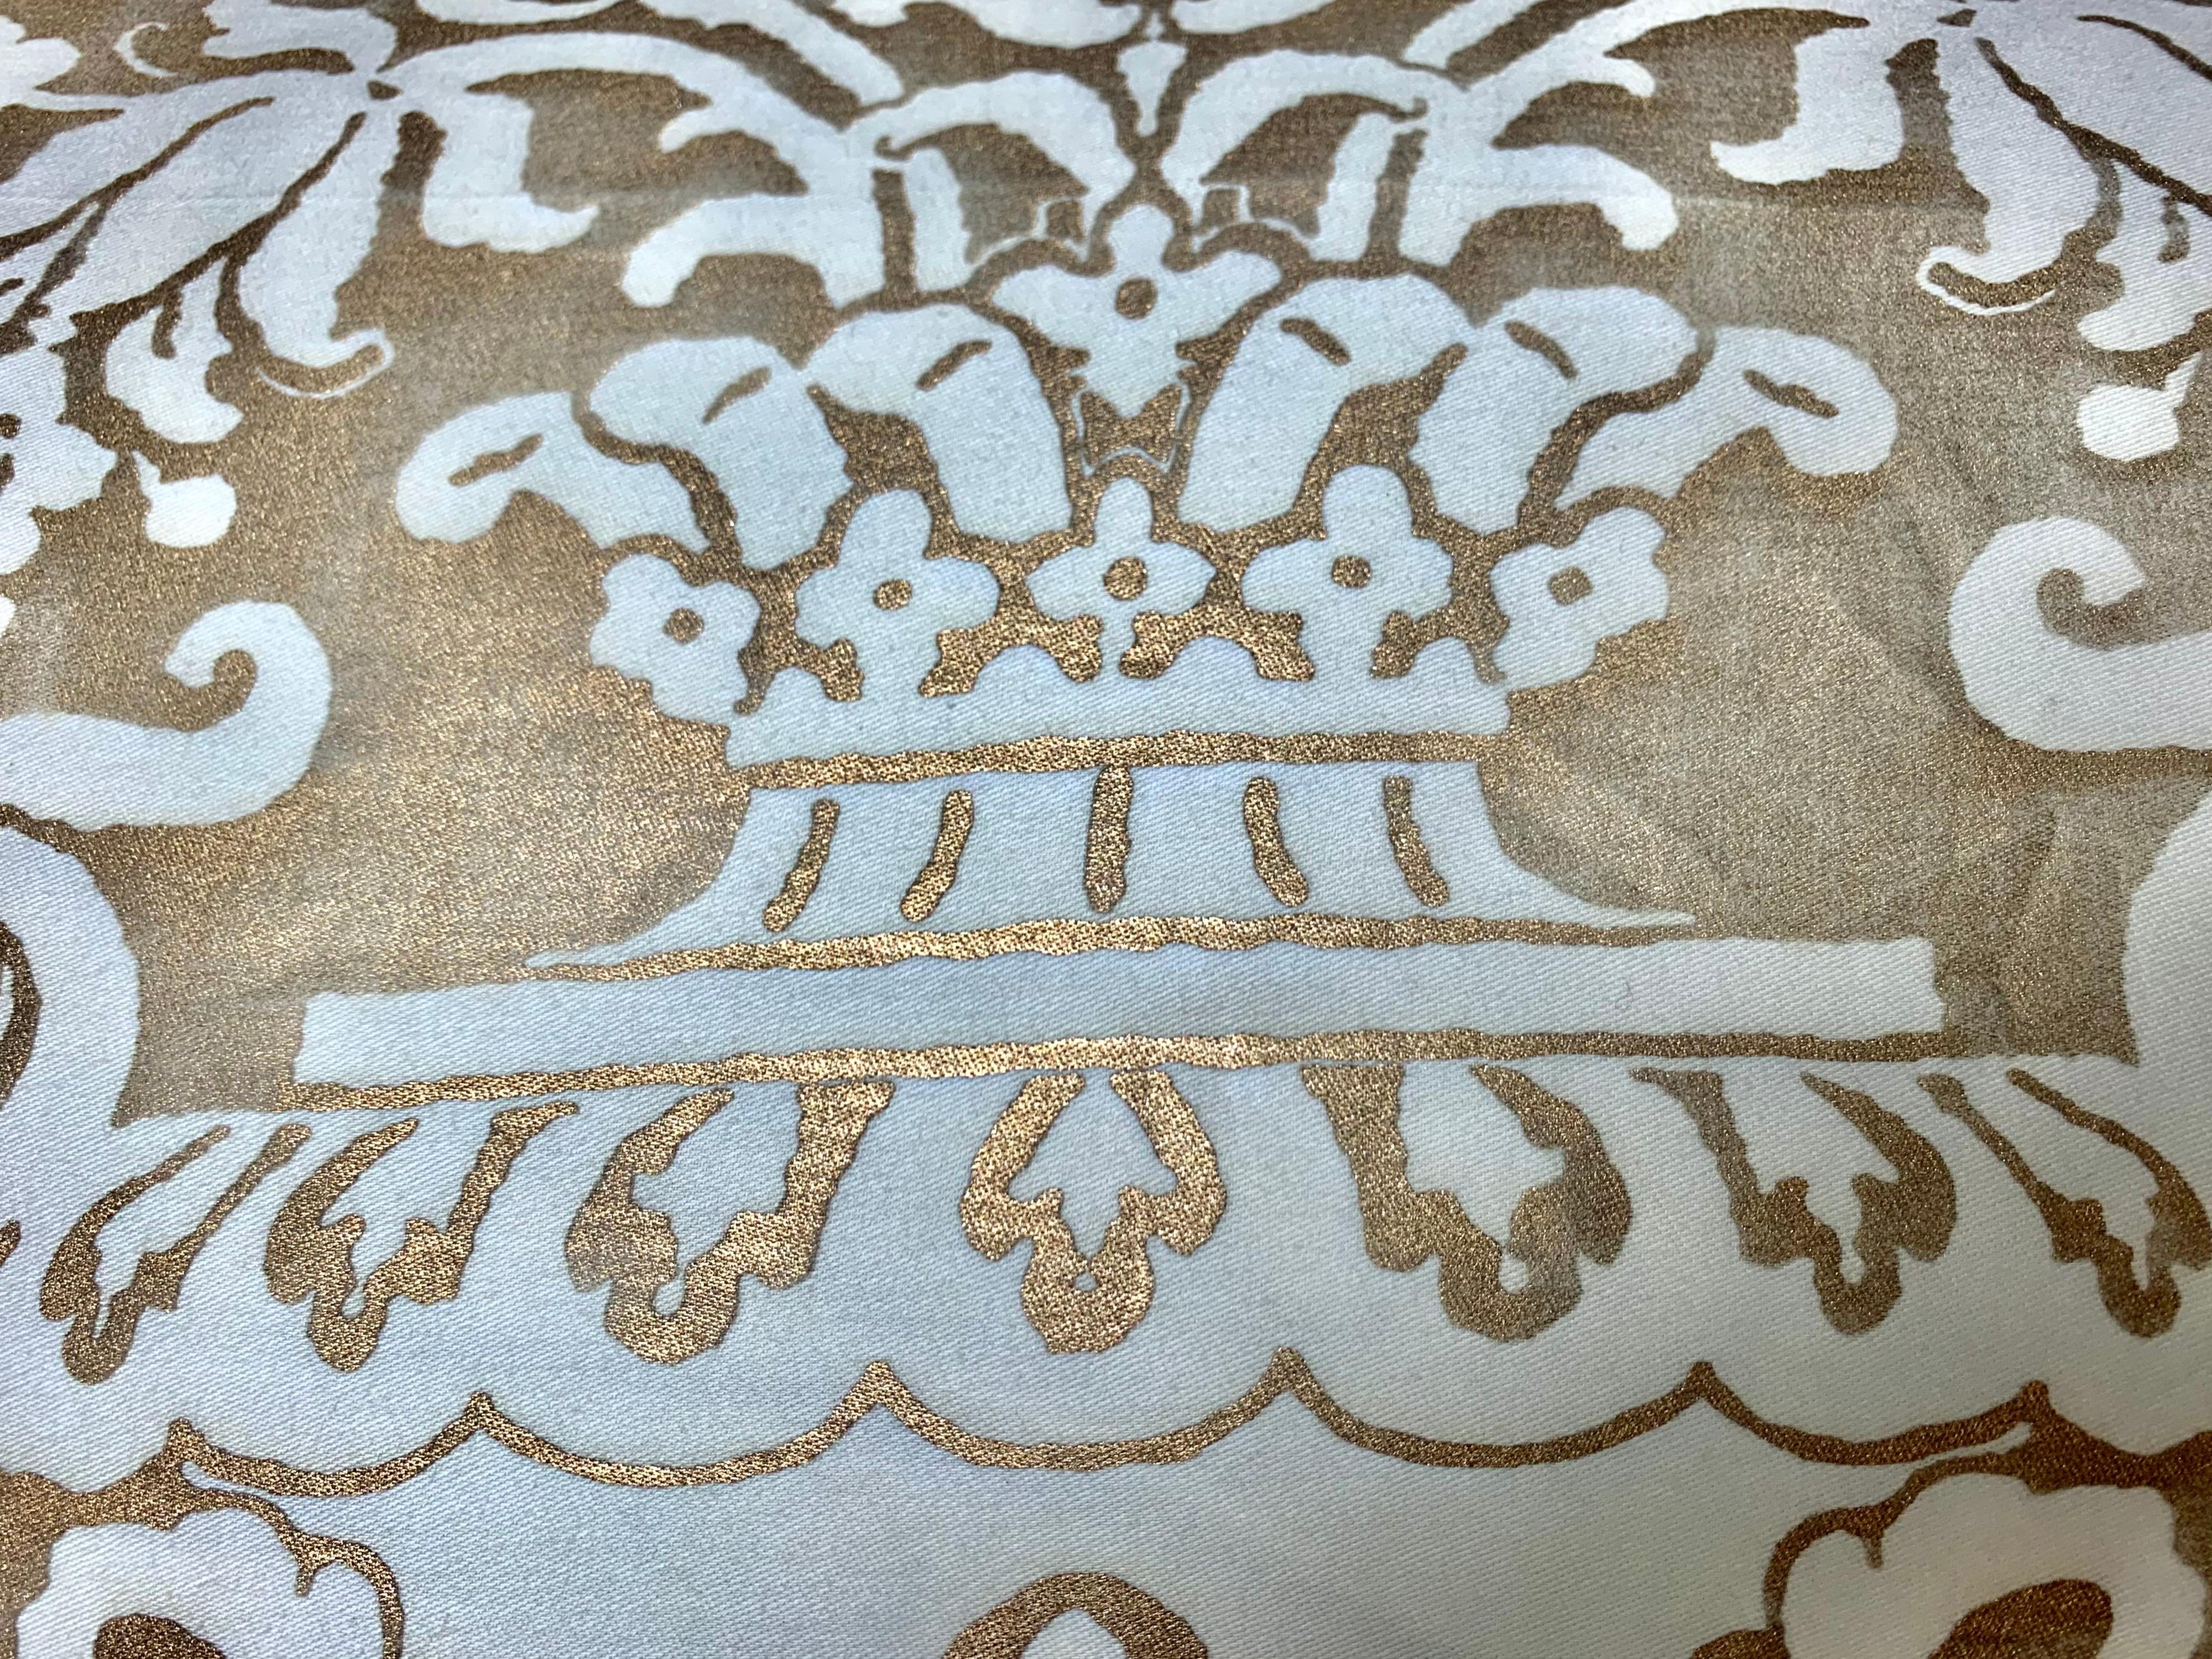 Italian White and Metallic Gold Carnevalet Patterned Fortuny Pillows, Pair